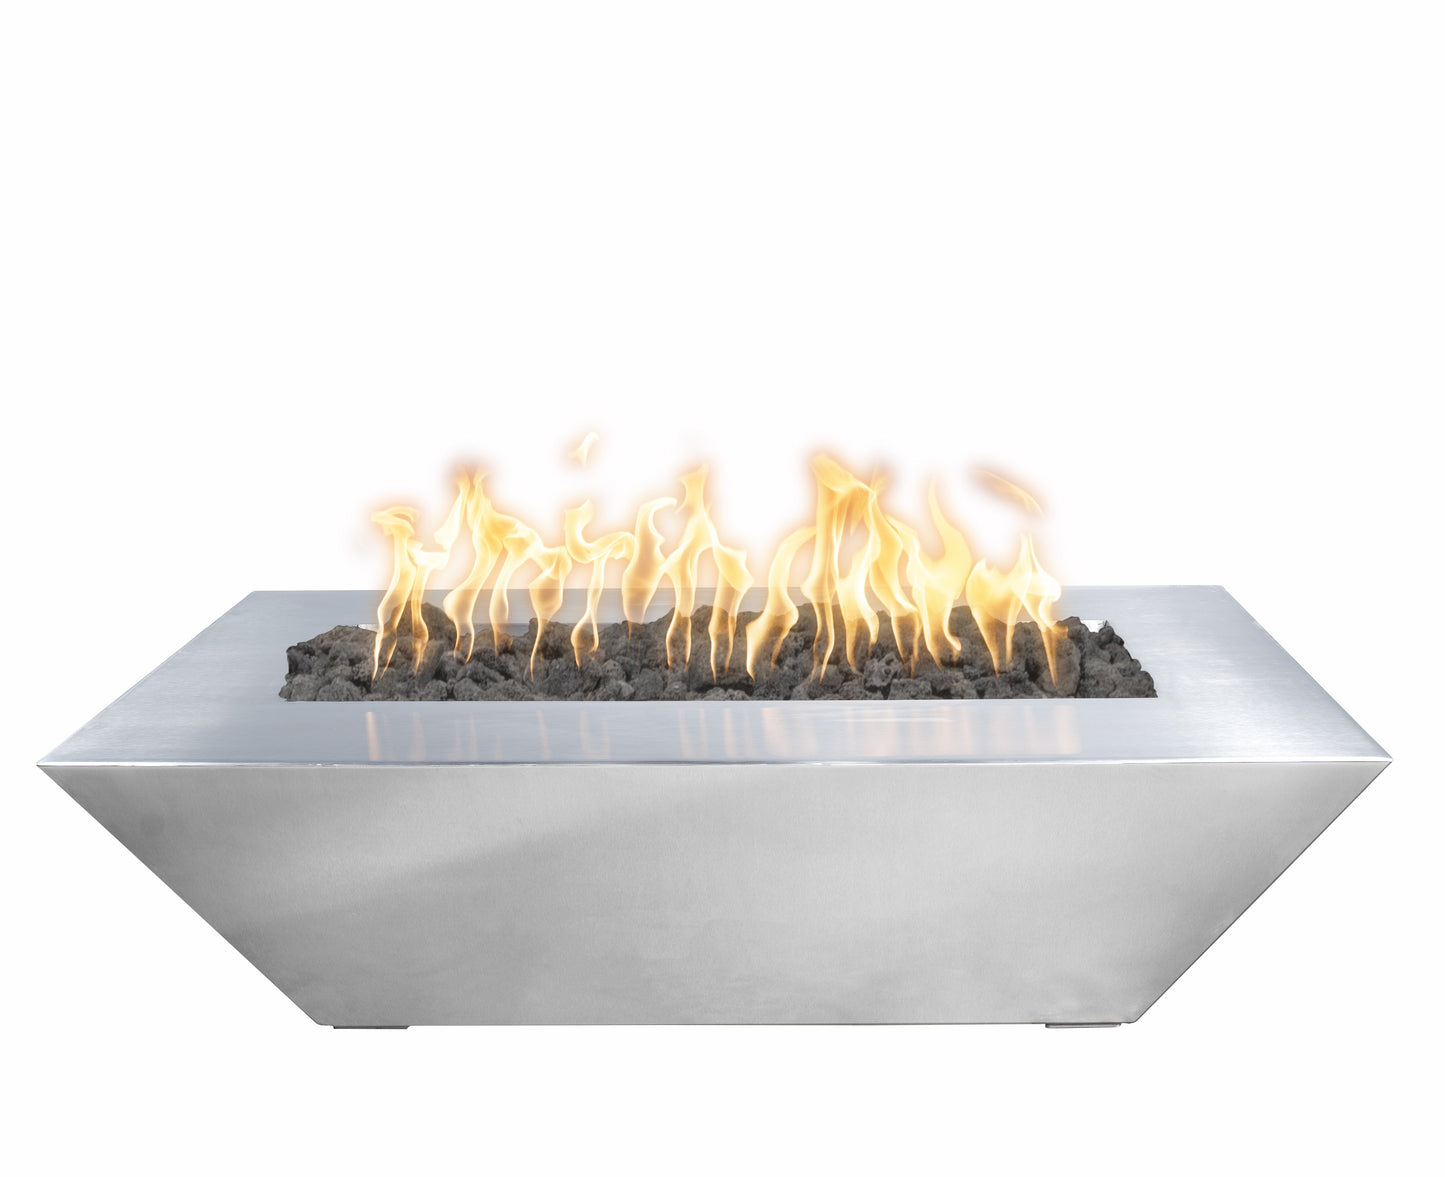 The Outdoor Plus Linear Maya 48" Stainless Steel Liquid Propane Fire Bowl with 12V Electronic Ignition